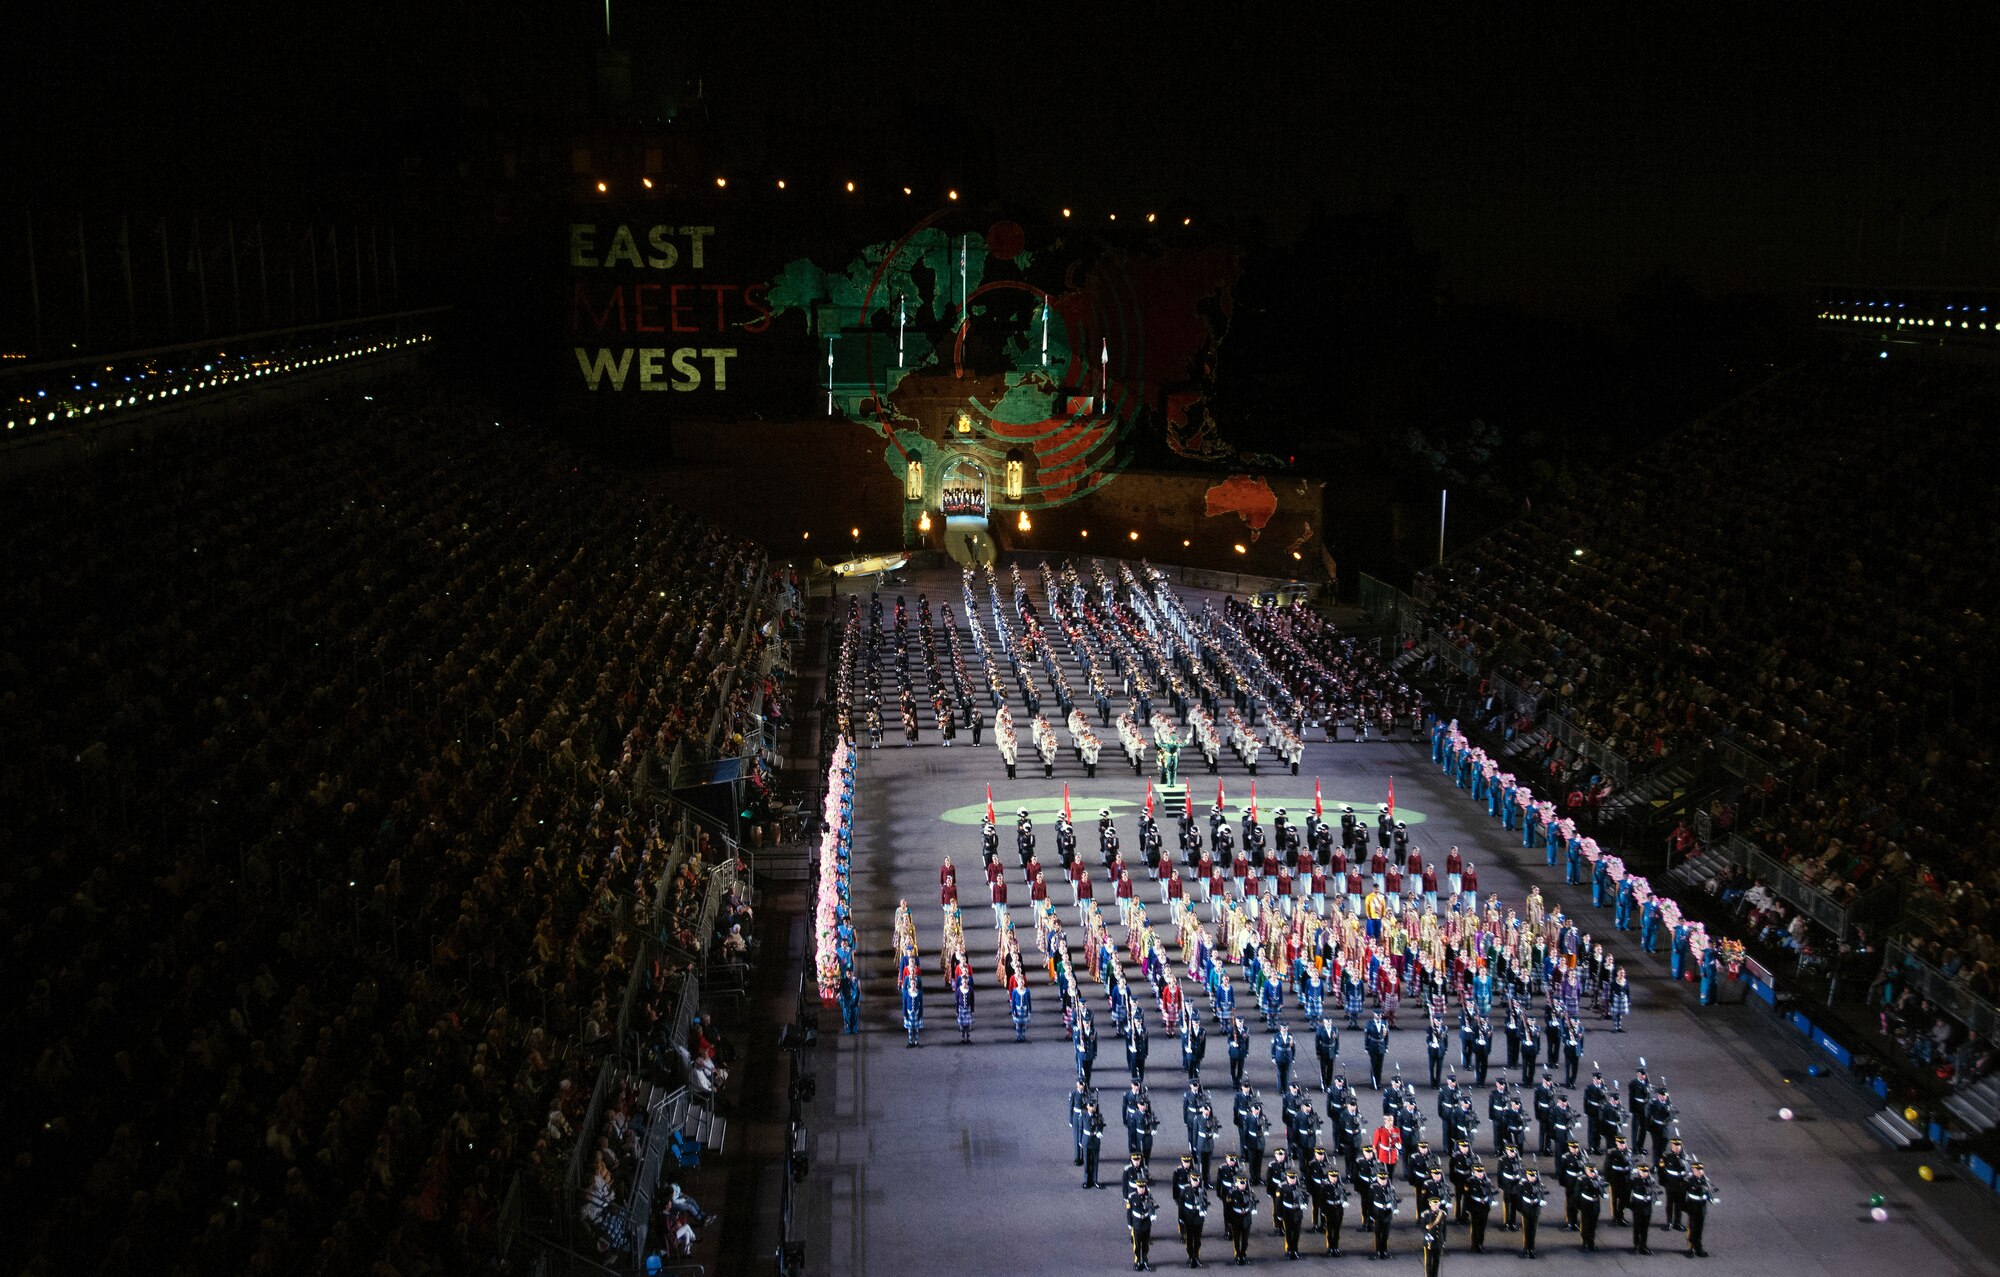 Performers stand in formation during the Royal Edinburgh Military Tattoo on the Esplanade of the Edinburgh Castle in Edinburgh, Scotland Aug. 6, 2015. The 66th production of the tattoo welcomes more than 220,000 spectators from around the world for more than 3 weeks. The event includes 17 acts for 25 performances and welcomes more than 1,390 performers from the US, Europe, Asia, Australia and Canada. The show features Bollywood dancers from India, the Military Band of the People’s Liberation Army of China, the Top Secret Drum Corps from Switzerland, the Royal Air Force and Queen’s Colour Squadron Mass Band and more. (U.S. Air Force photo/Staff Sgt. Nichelle Anderson/Released)